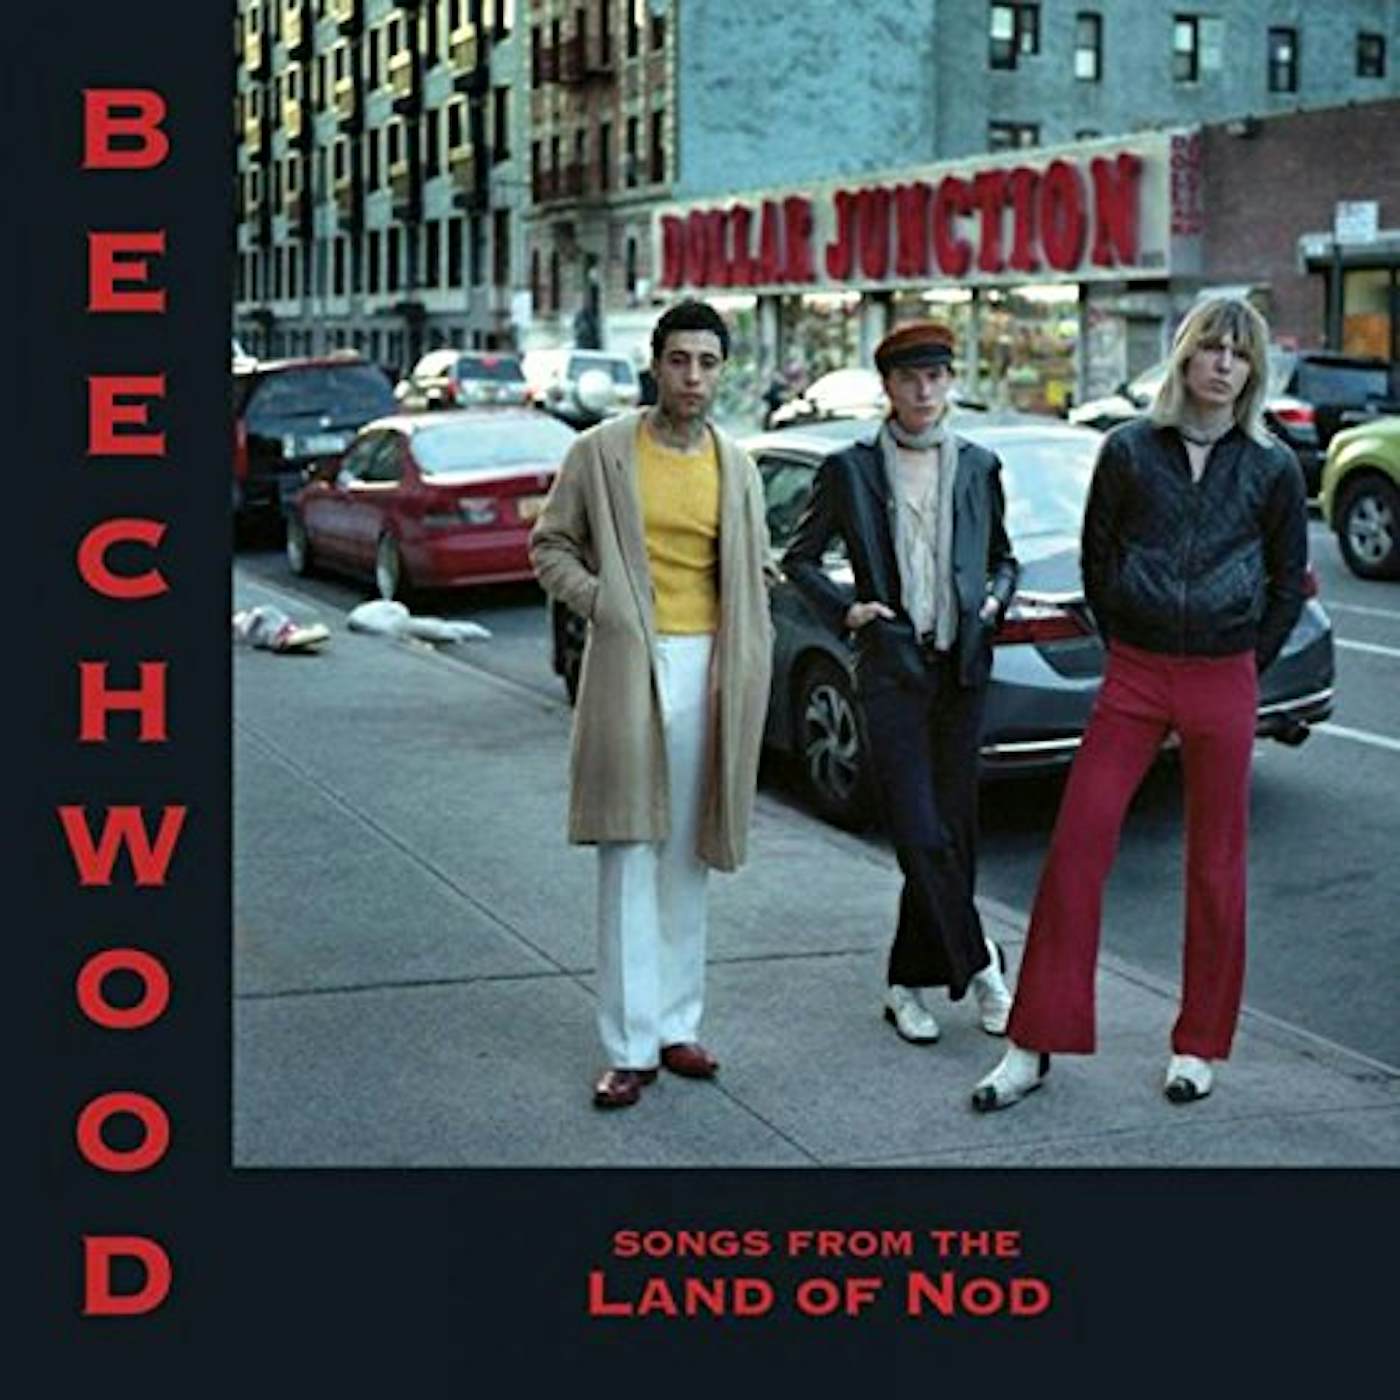 Beechwood Songs from the Land of Nod Vinyl Record